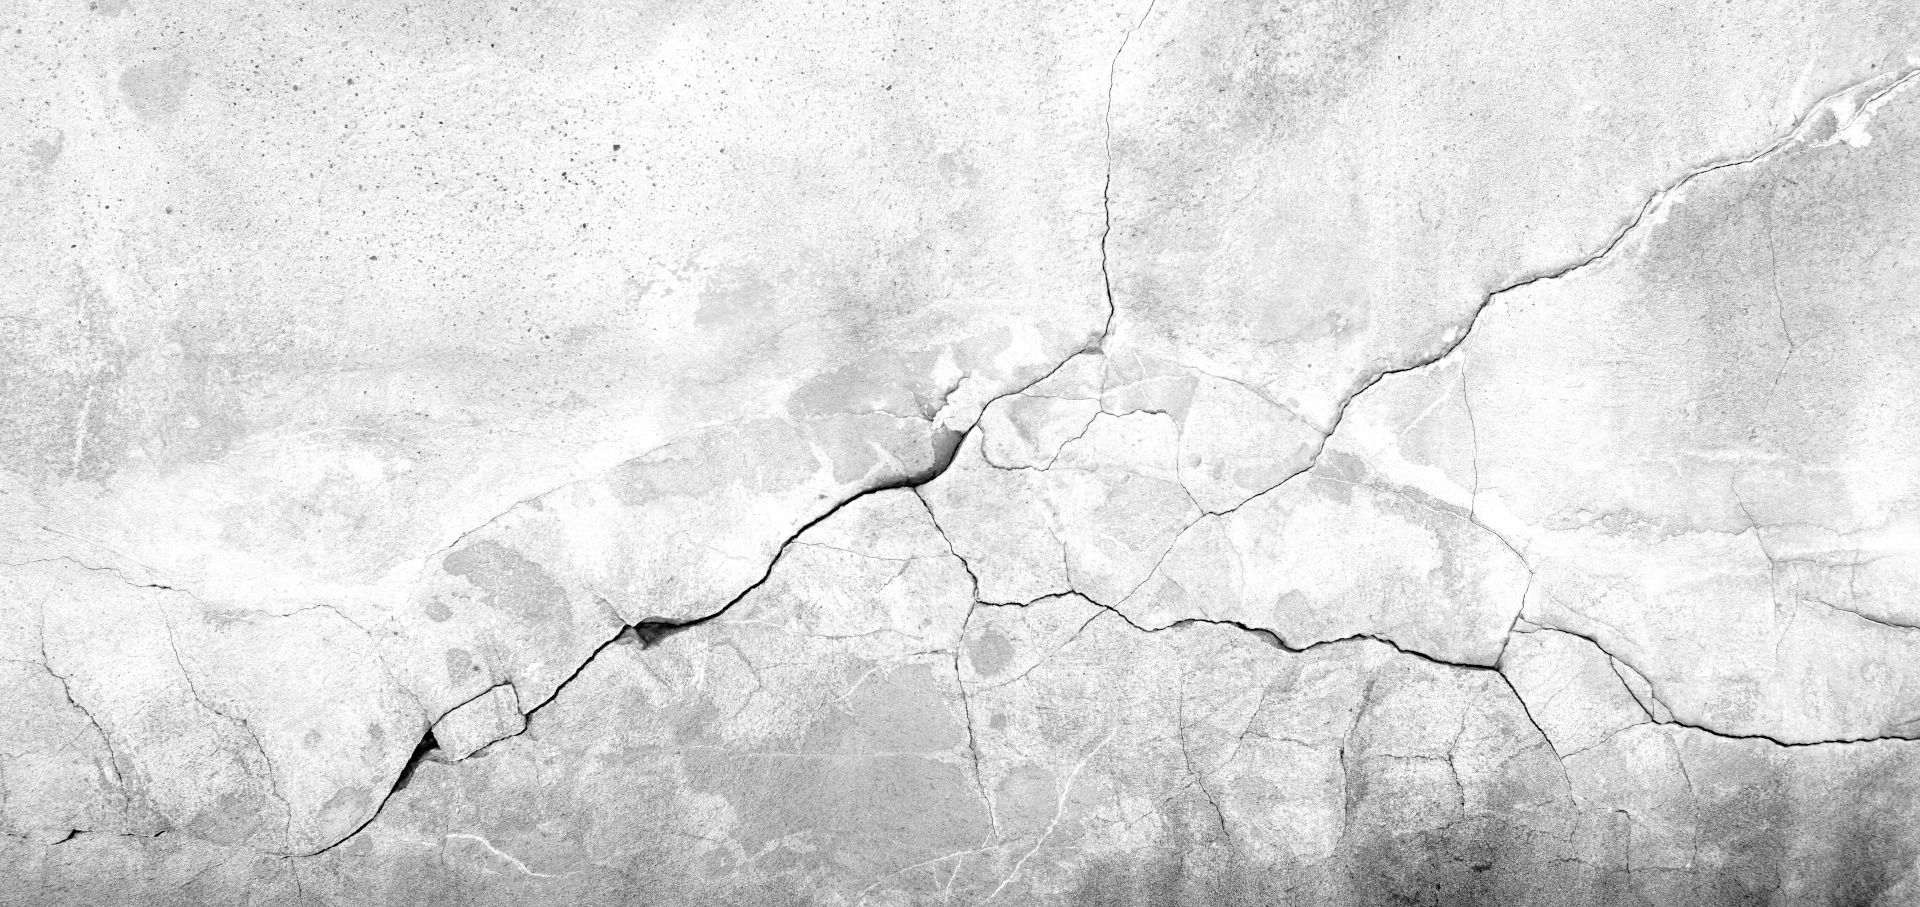 Cracked and damaged concrete